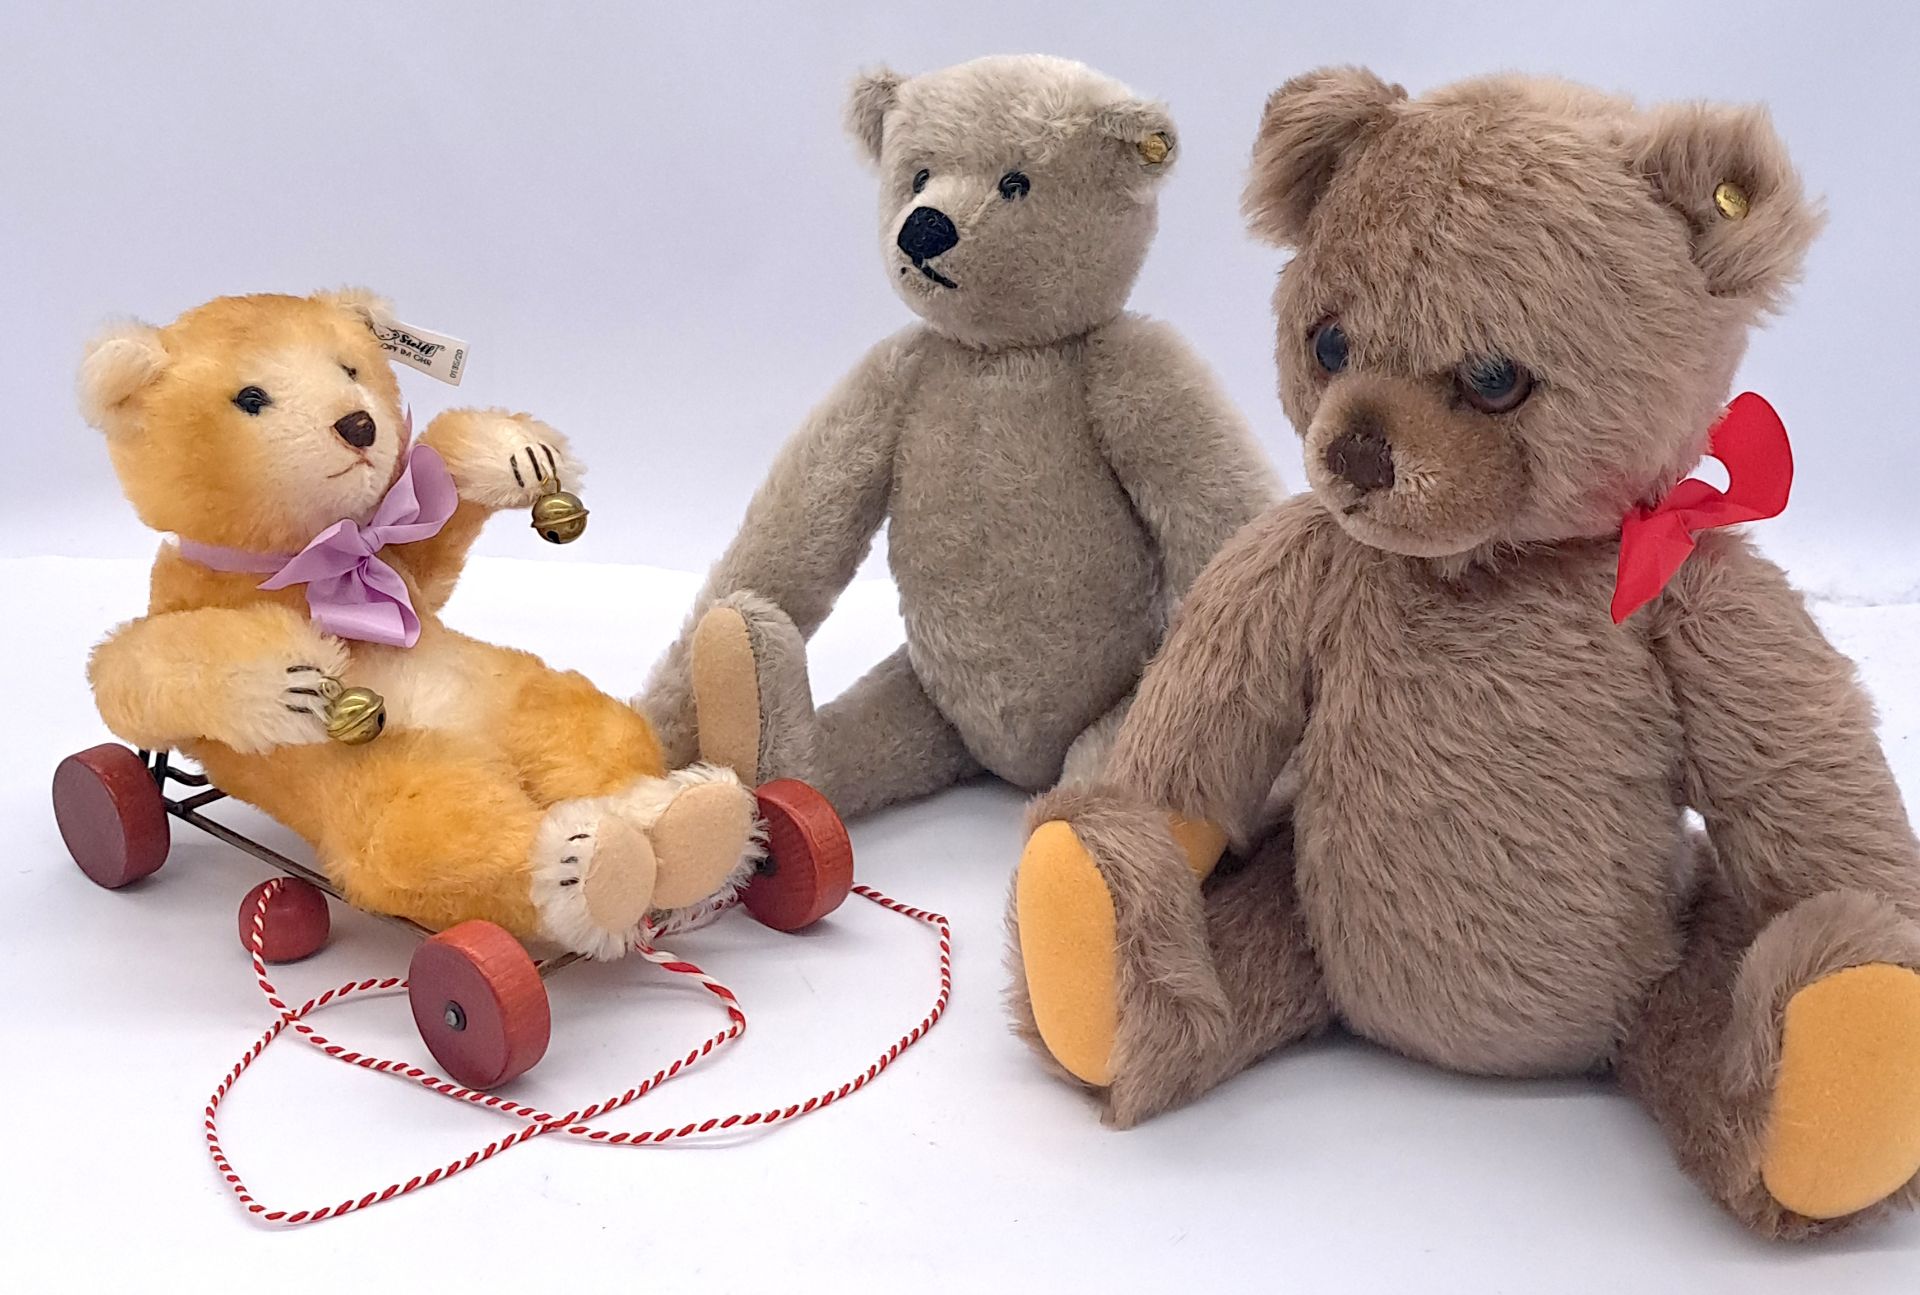 Steiff Museum Collection Baby Bear with Wagon replica, plus two other Steiff bears